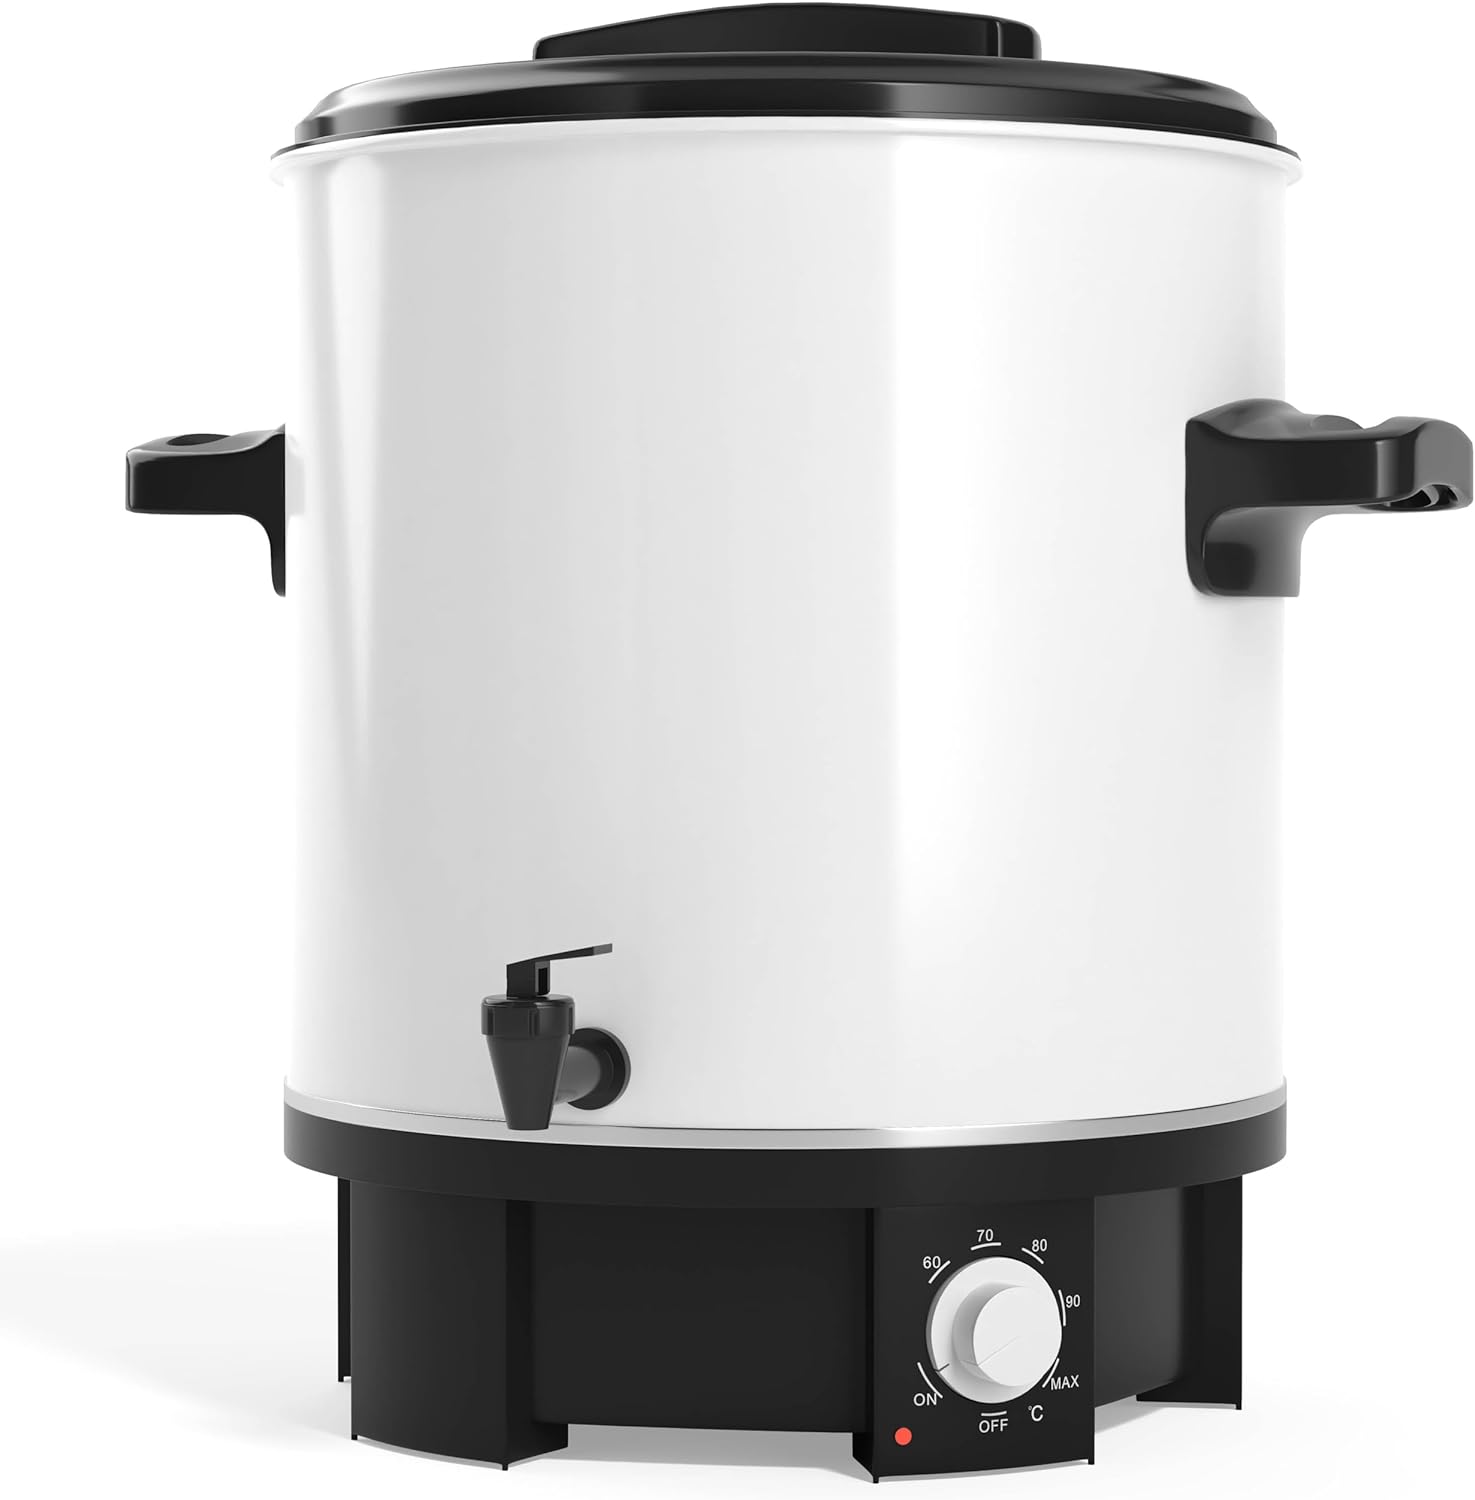 Preserving Machine 27 Litres 1800 Watt with Tap in White - Ideal as a Preserving Pot, Preserving Pot & Mulled Wine Cooker - GEAMELD DESIGN for Coffee, Tea, Punch & Soups